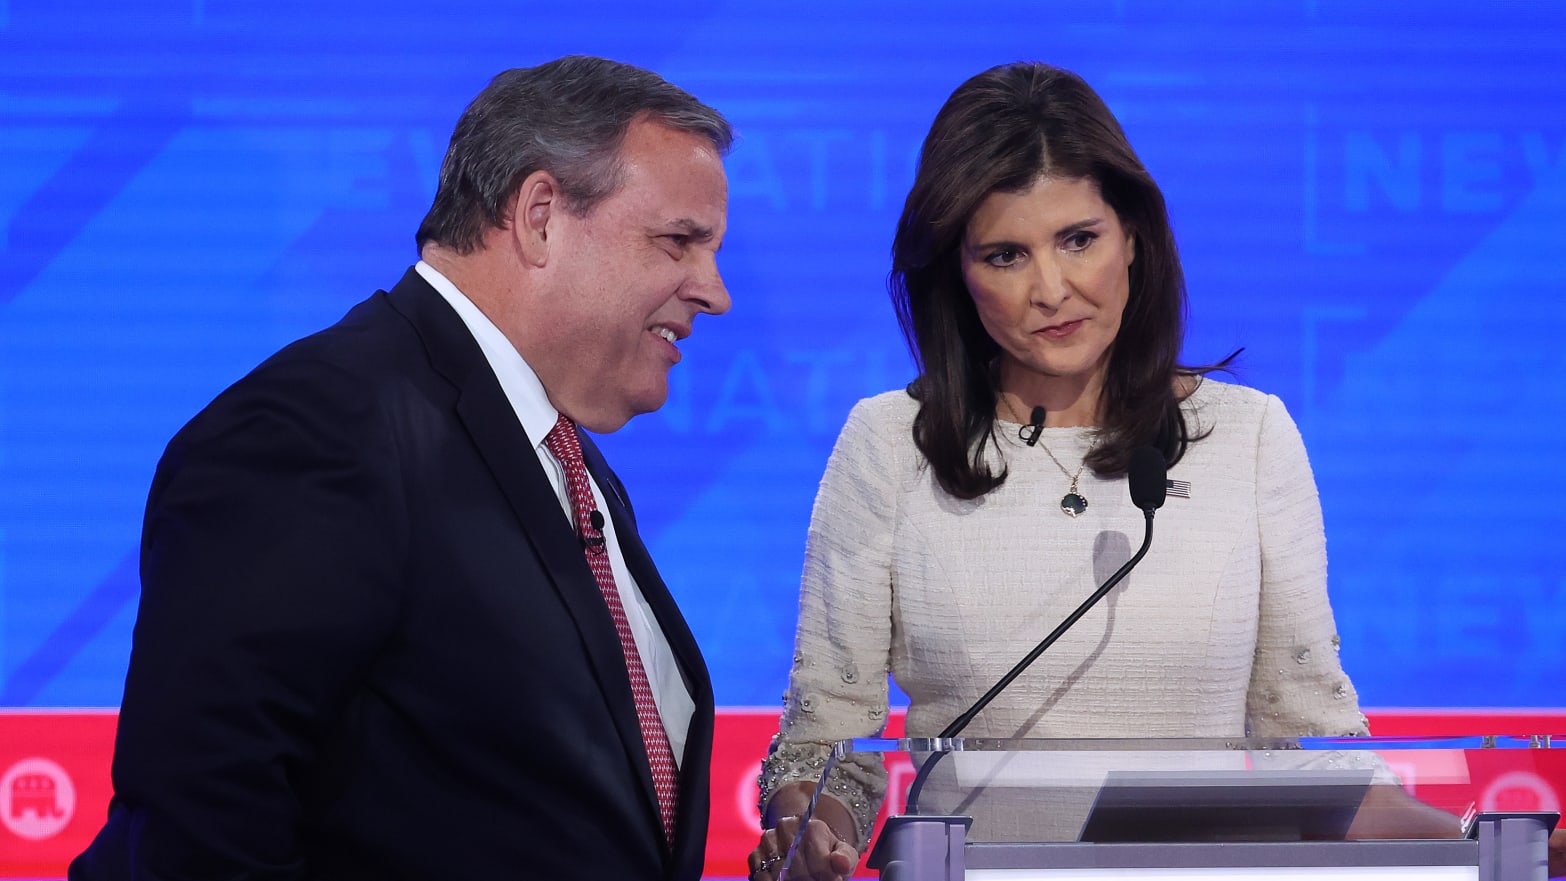 Chris Christie’s Controversial Comments About Nikki Haley